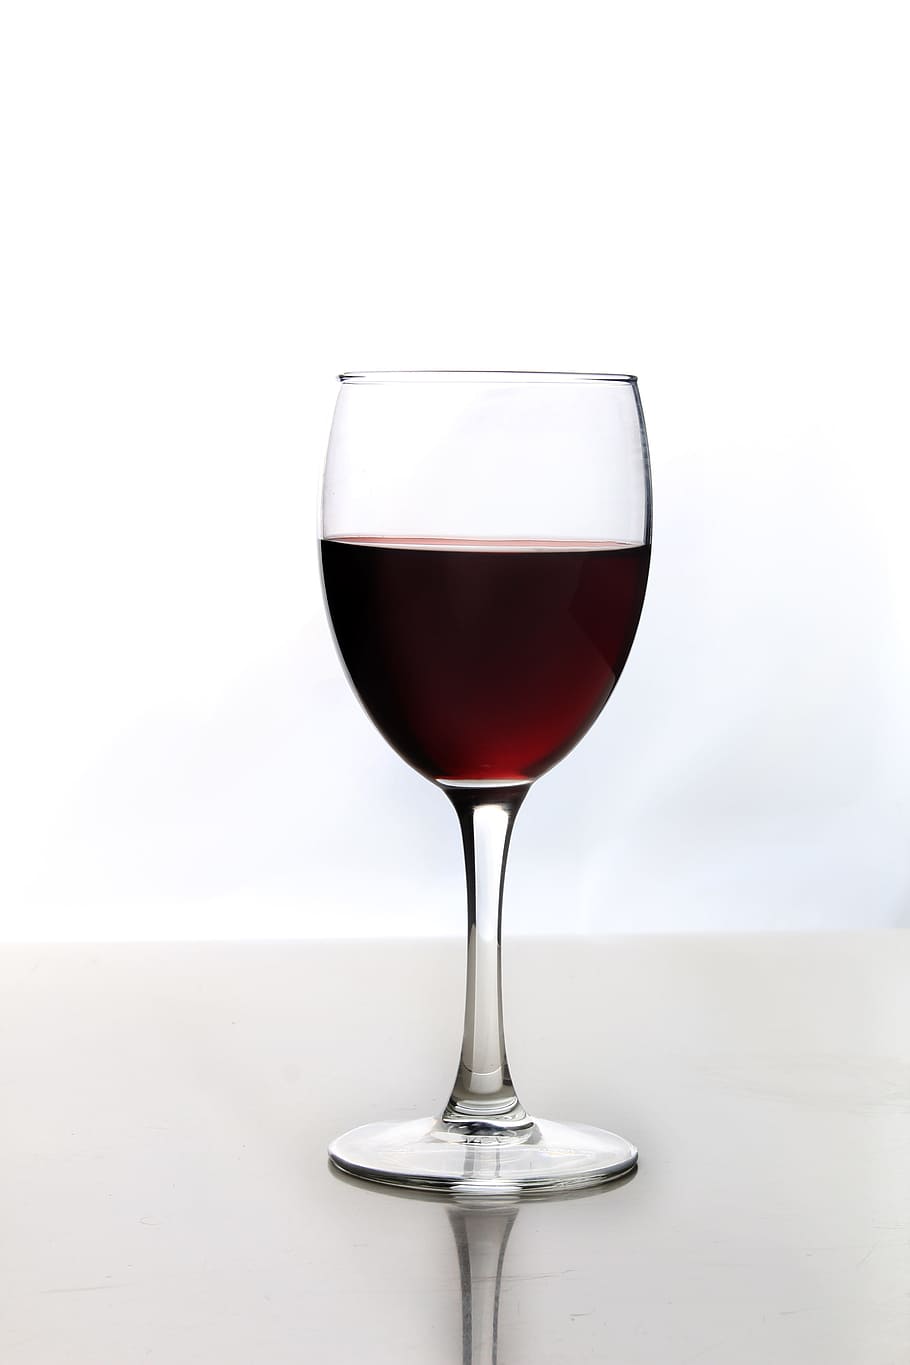 long-stem glass, wine, white, surface, Wine, Glass, Beverage, Healthy Food, glass, red, food